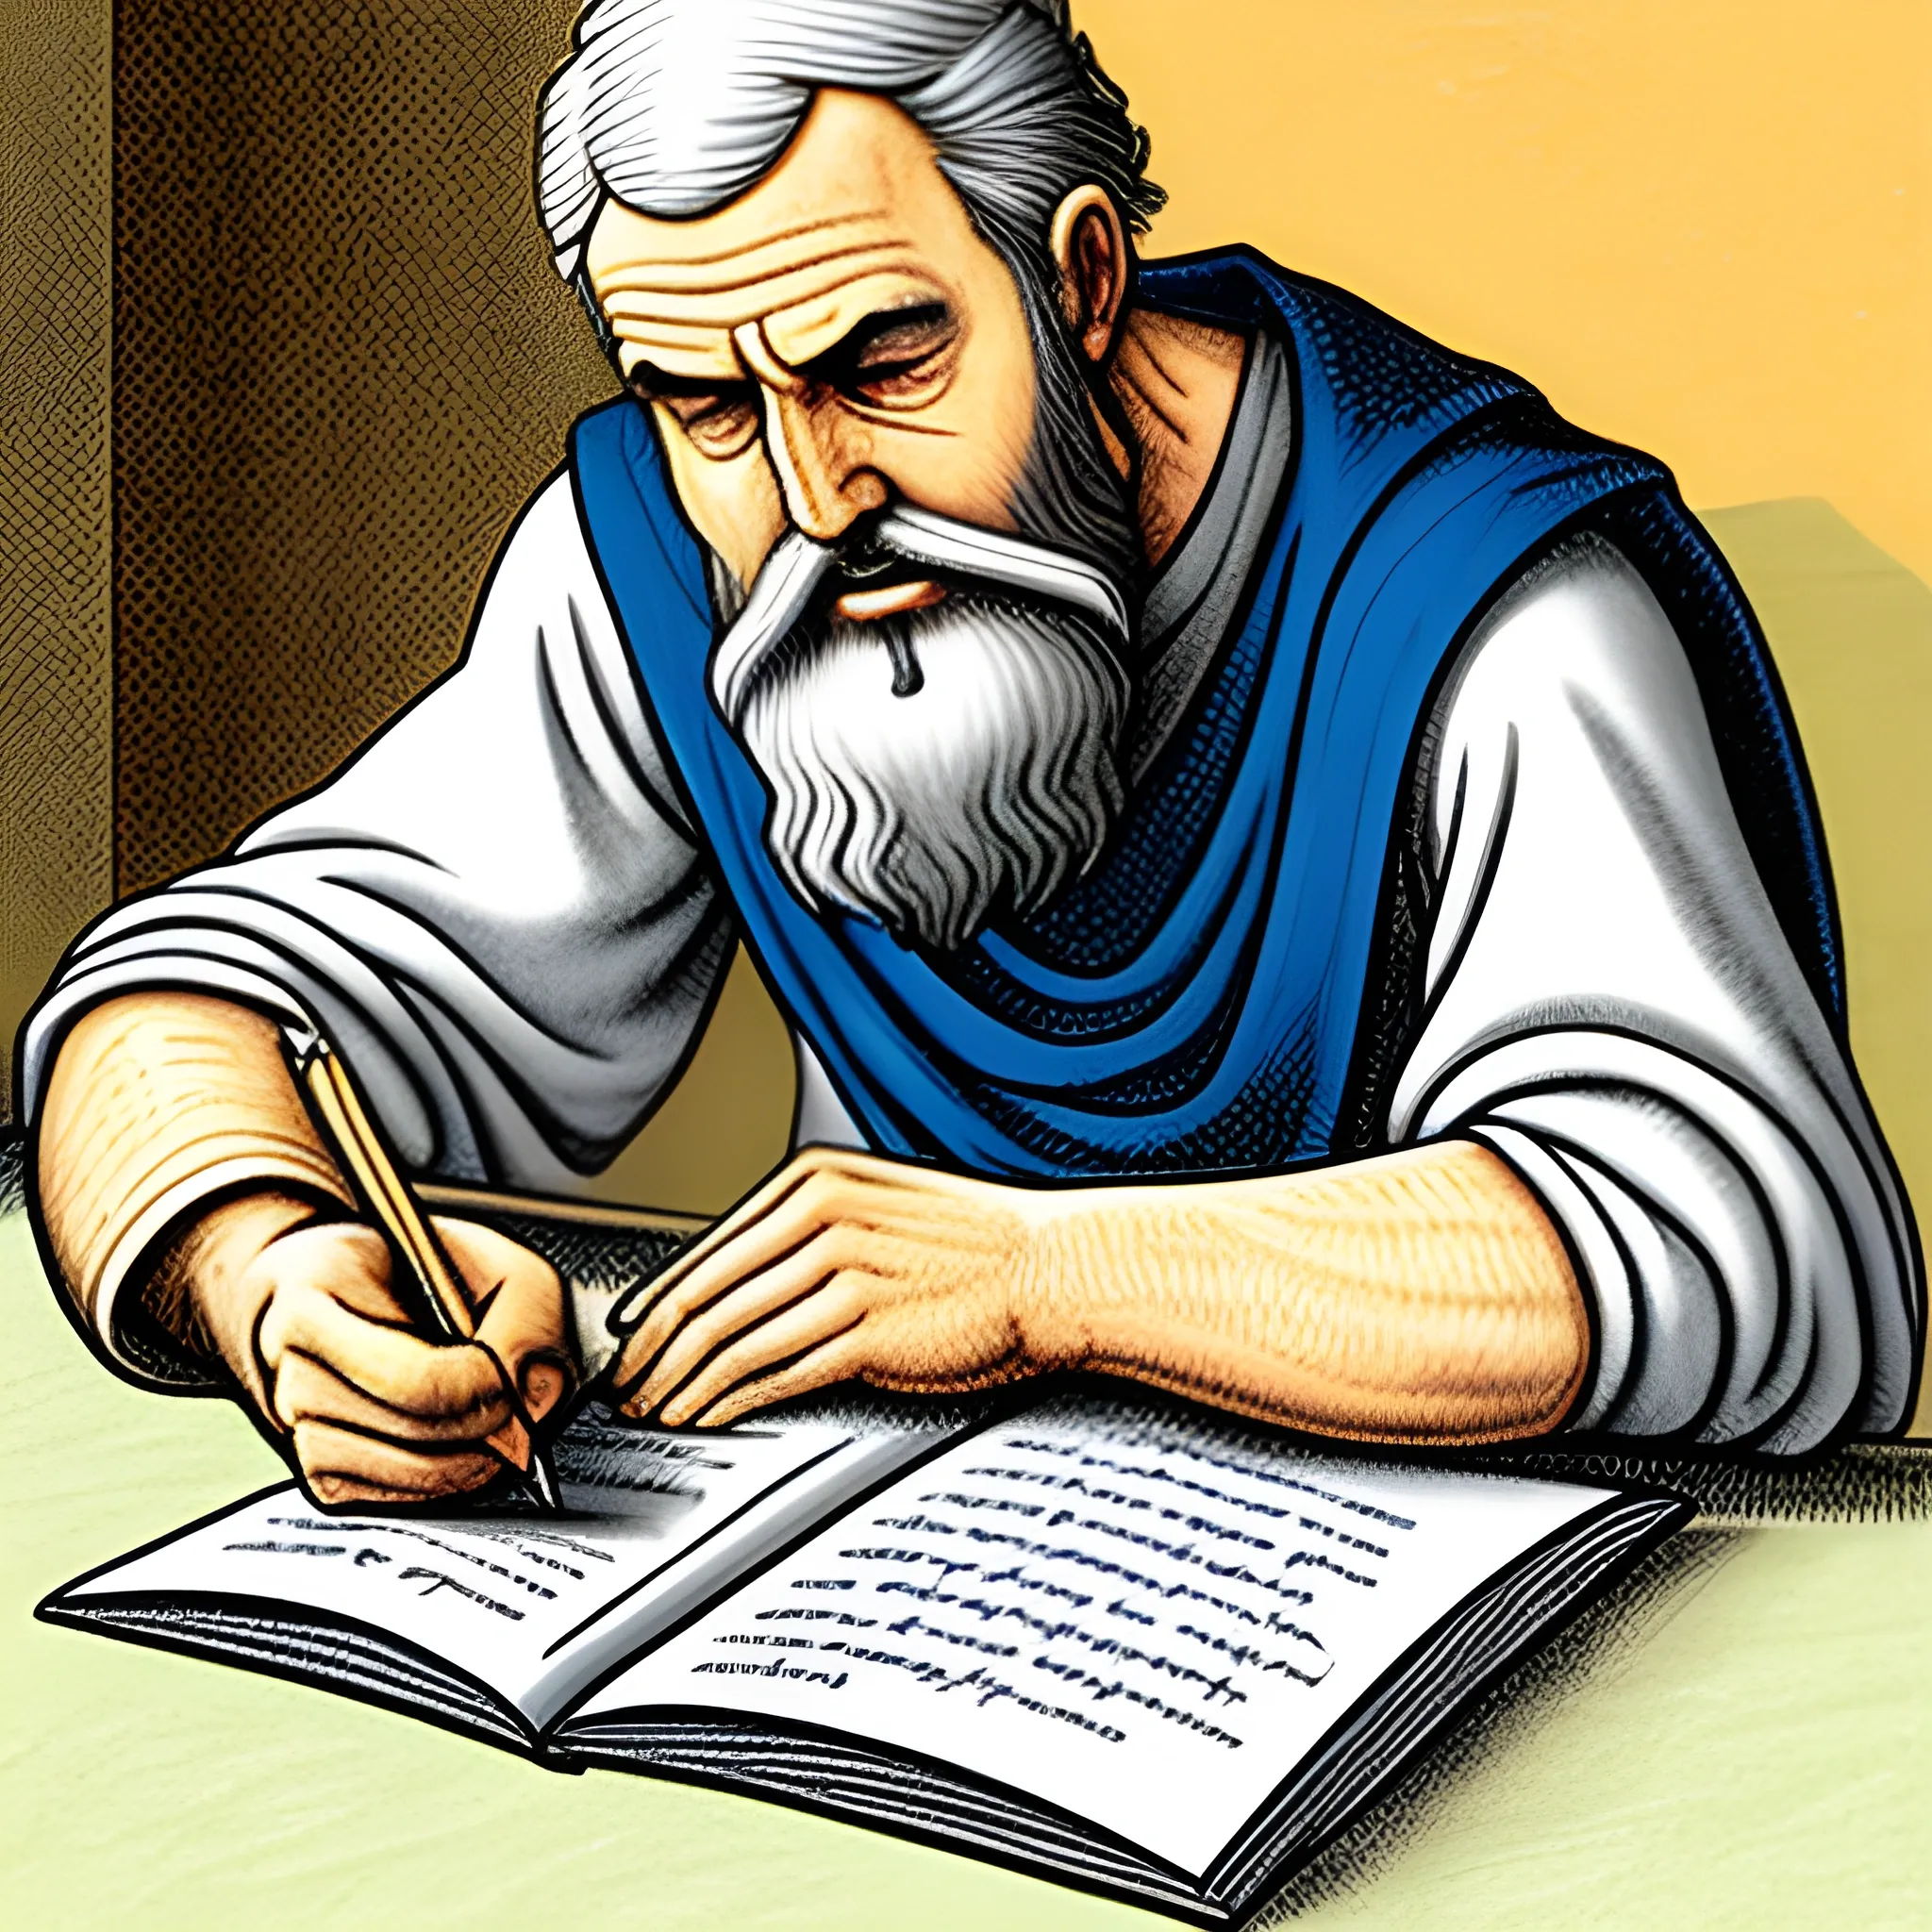  Draw aN APOSTLE PAUL WRITING A LETTER TO THE OTHER APOSTLES, Cartoon